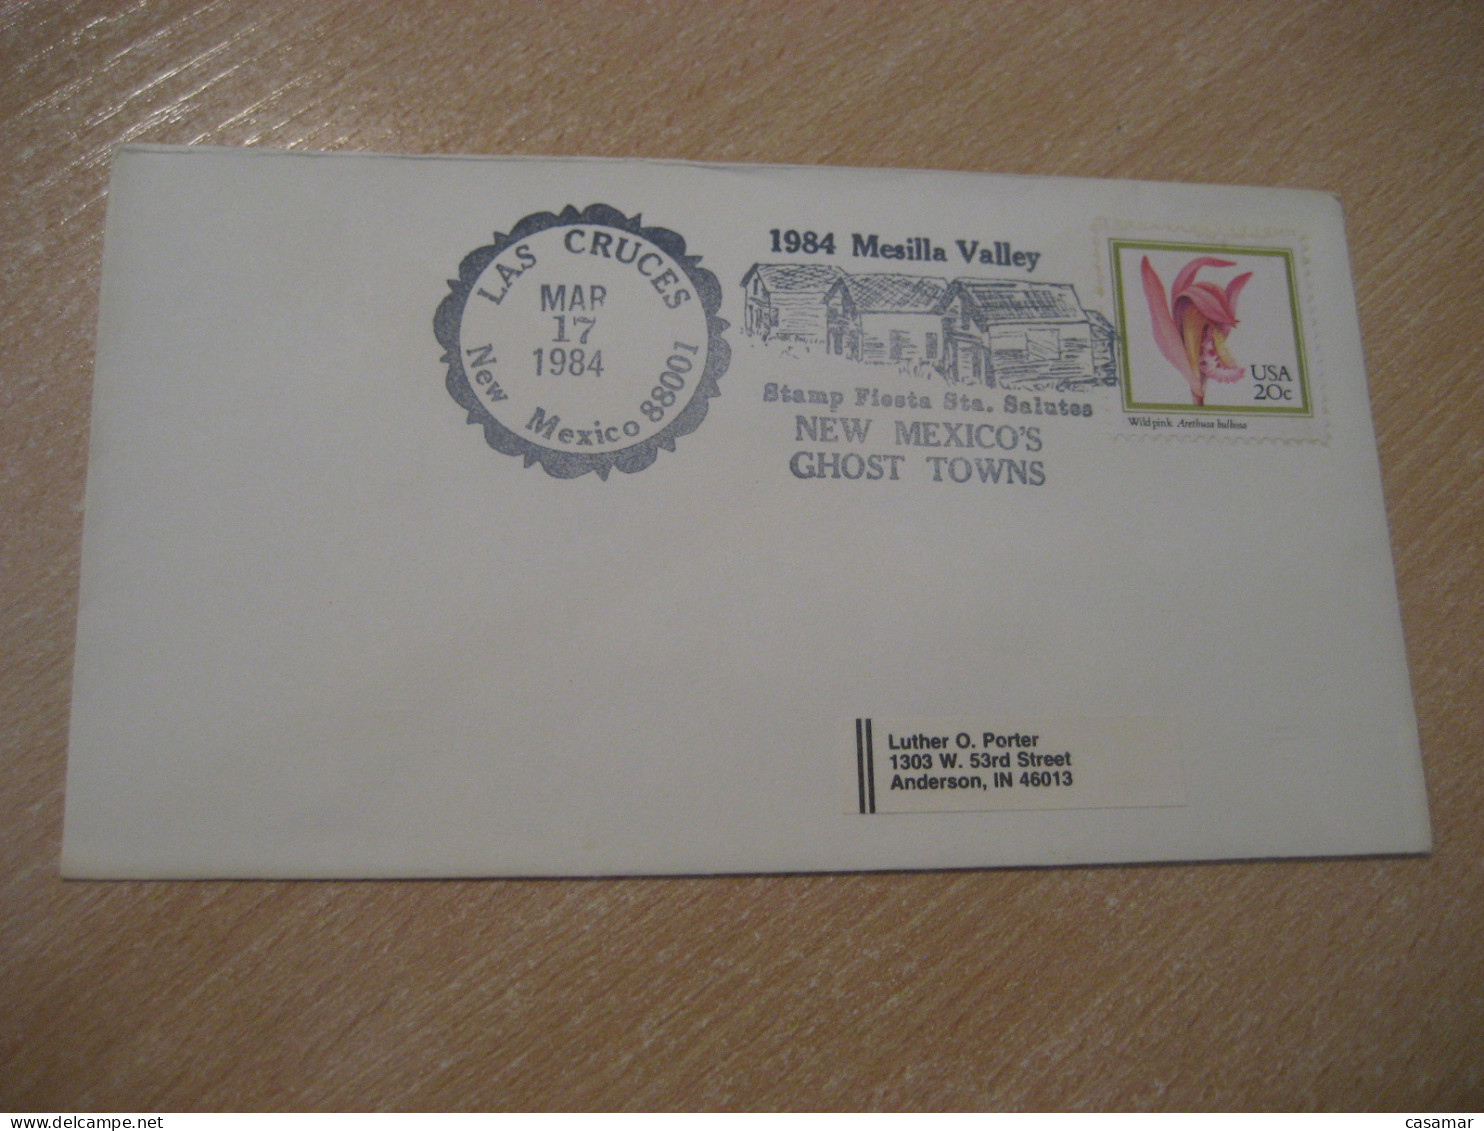 LAS CRUCES 1984 Mesilla Valley New Mexico Ghost Towns American Indians Indian Cancel Cover USA Indigenous Native History - Indios Americanas